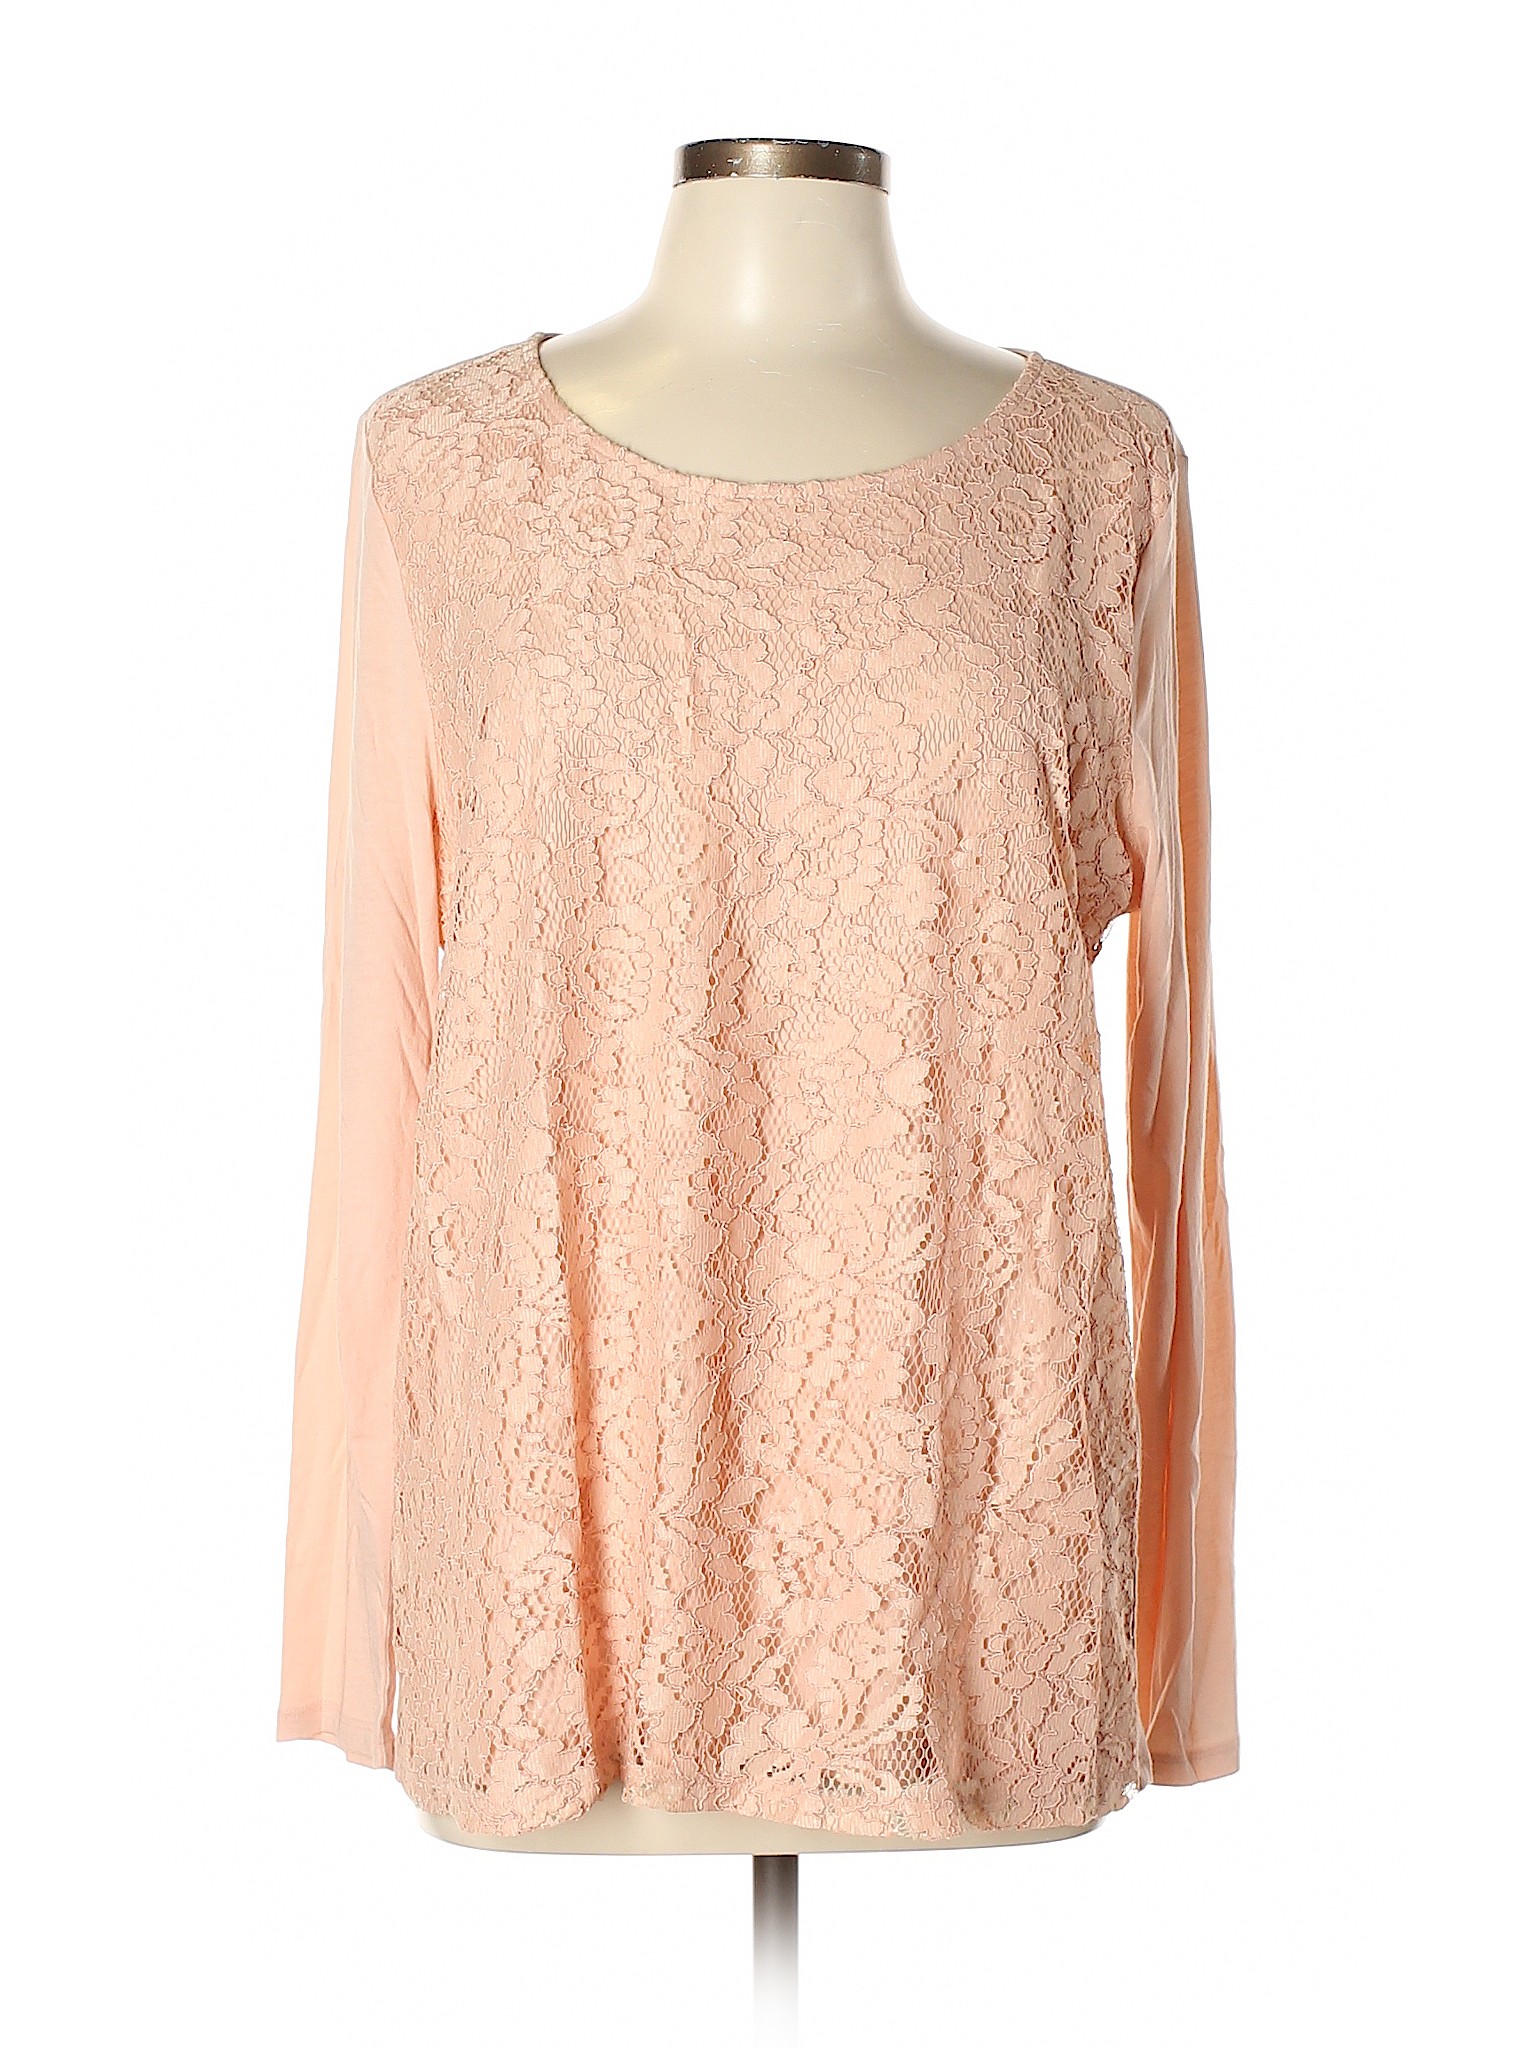 Ann Taylor Lace Pink Long Sleeve Blouse Size XL - 82% off | thredUP